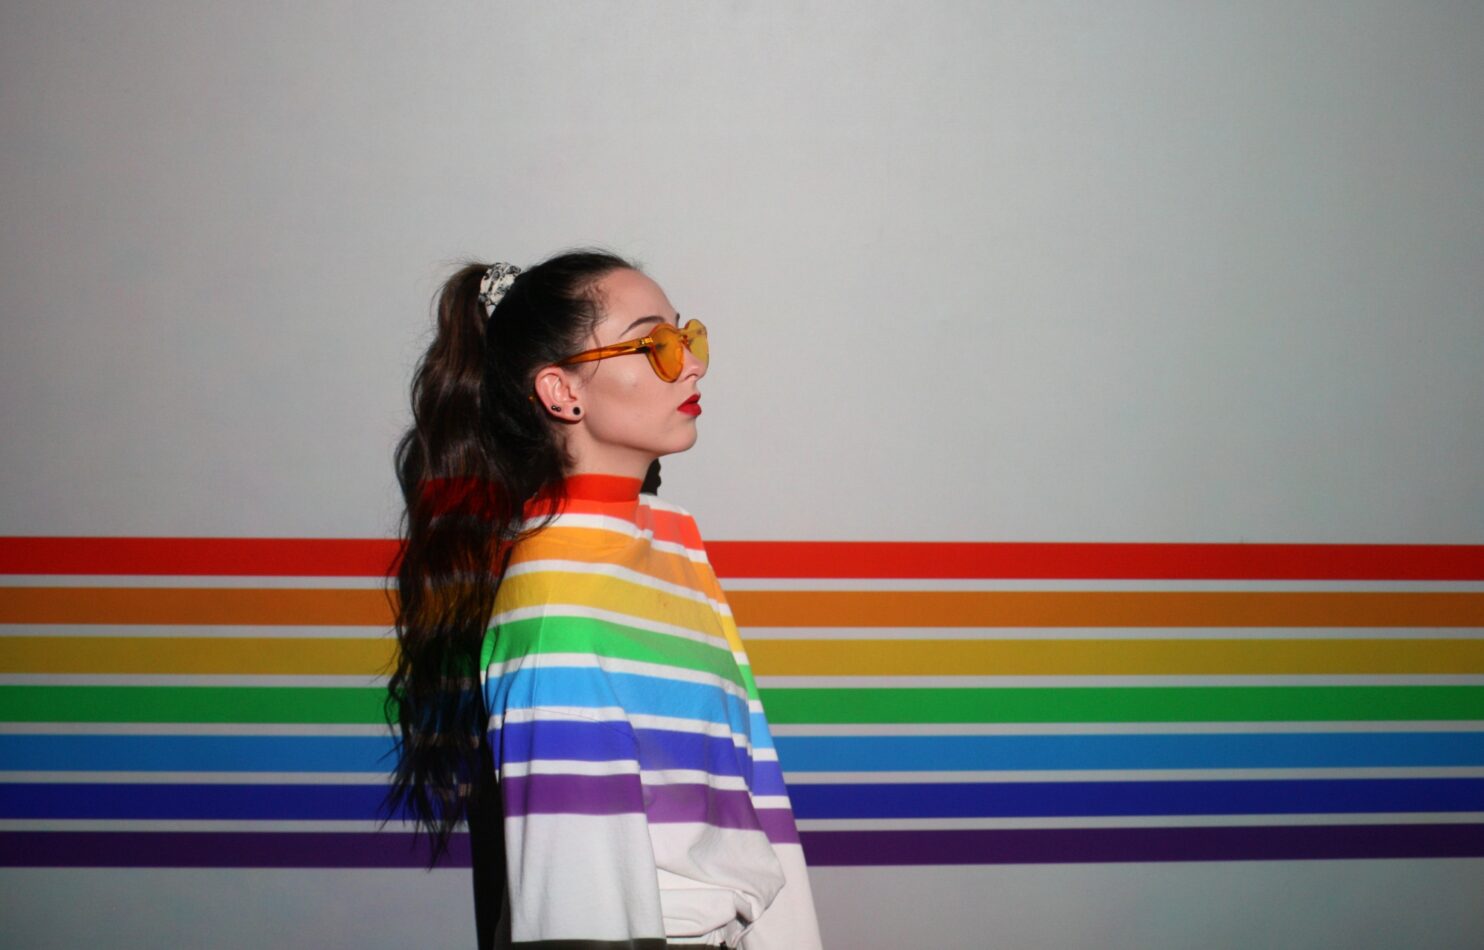 Women with a ponytail, sunglasses and a white hoddie with the random colors lines going across the image.